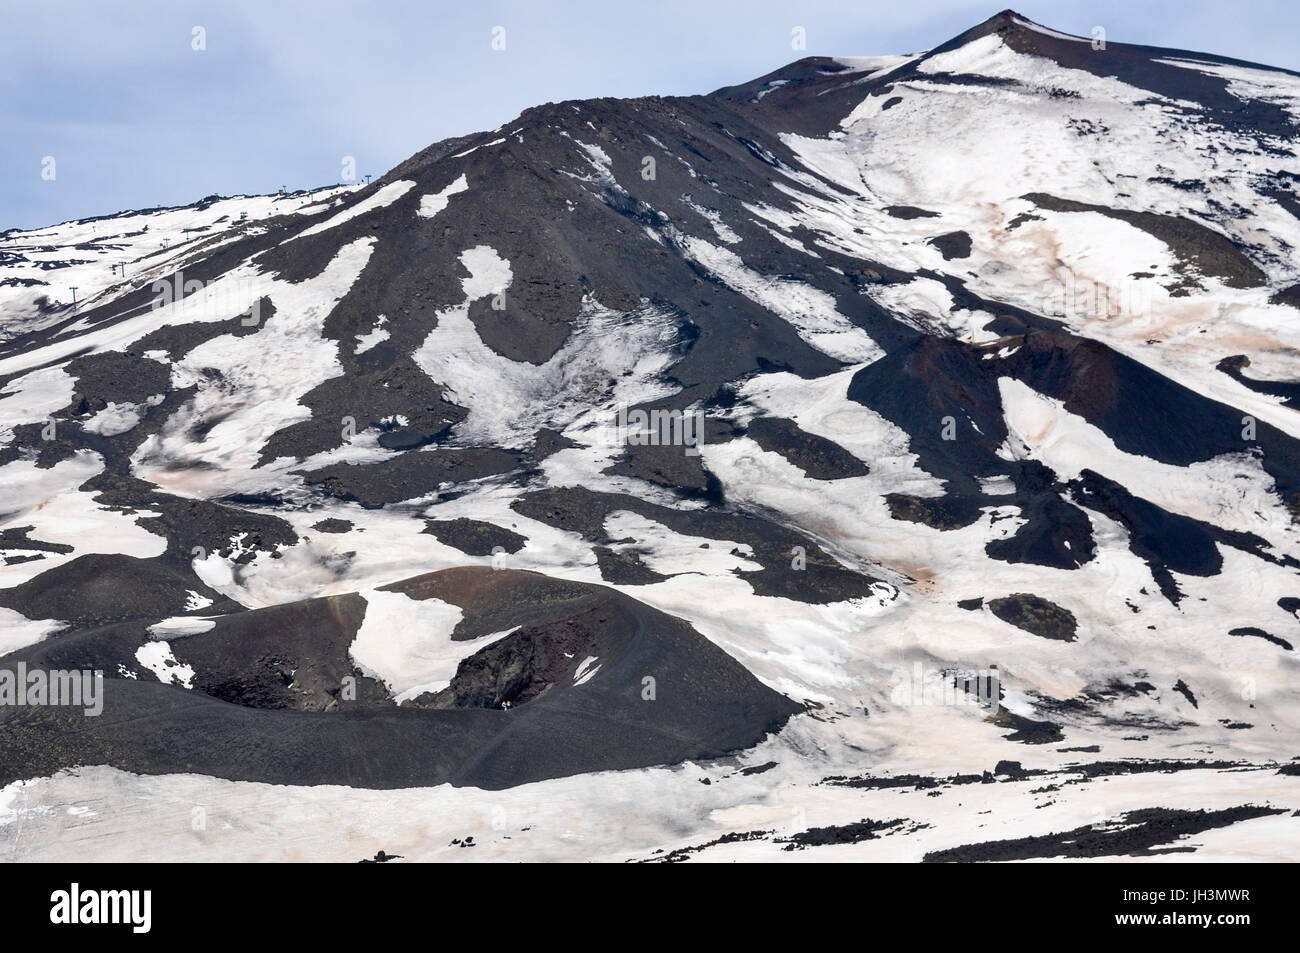 Snow and lava rock on the volcano, Mount Etna, Sicily, Italy. Stock Photo